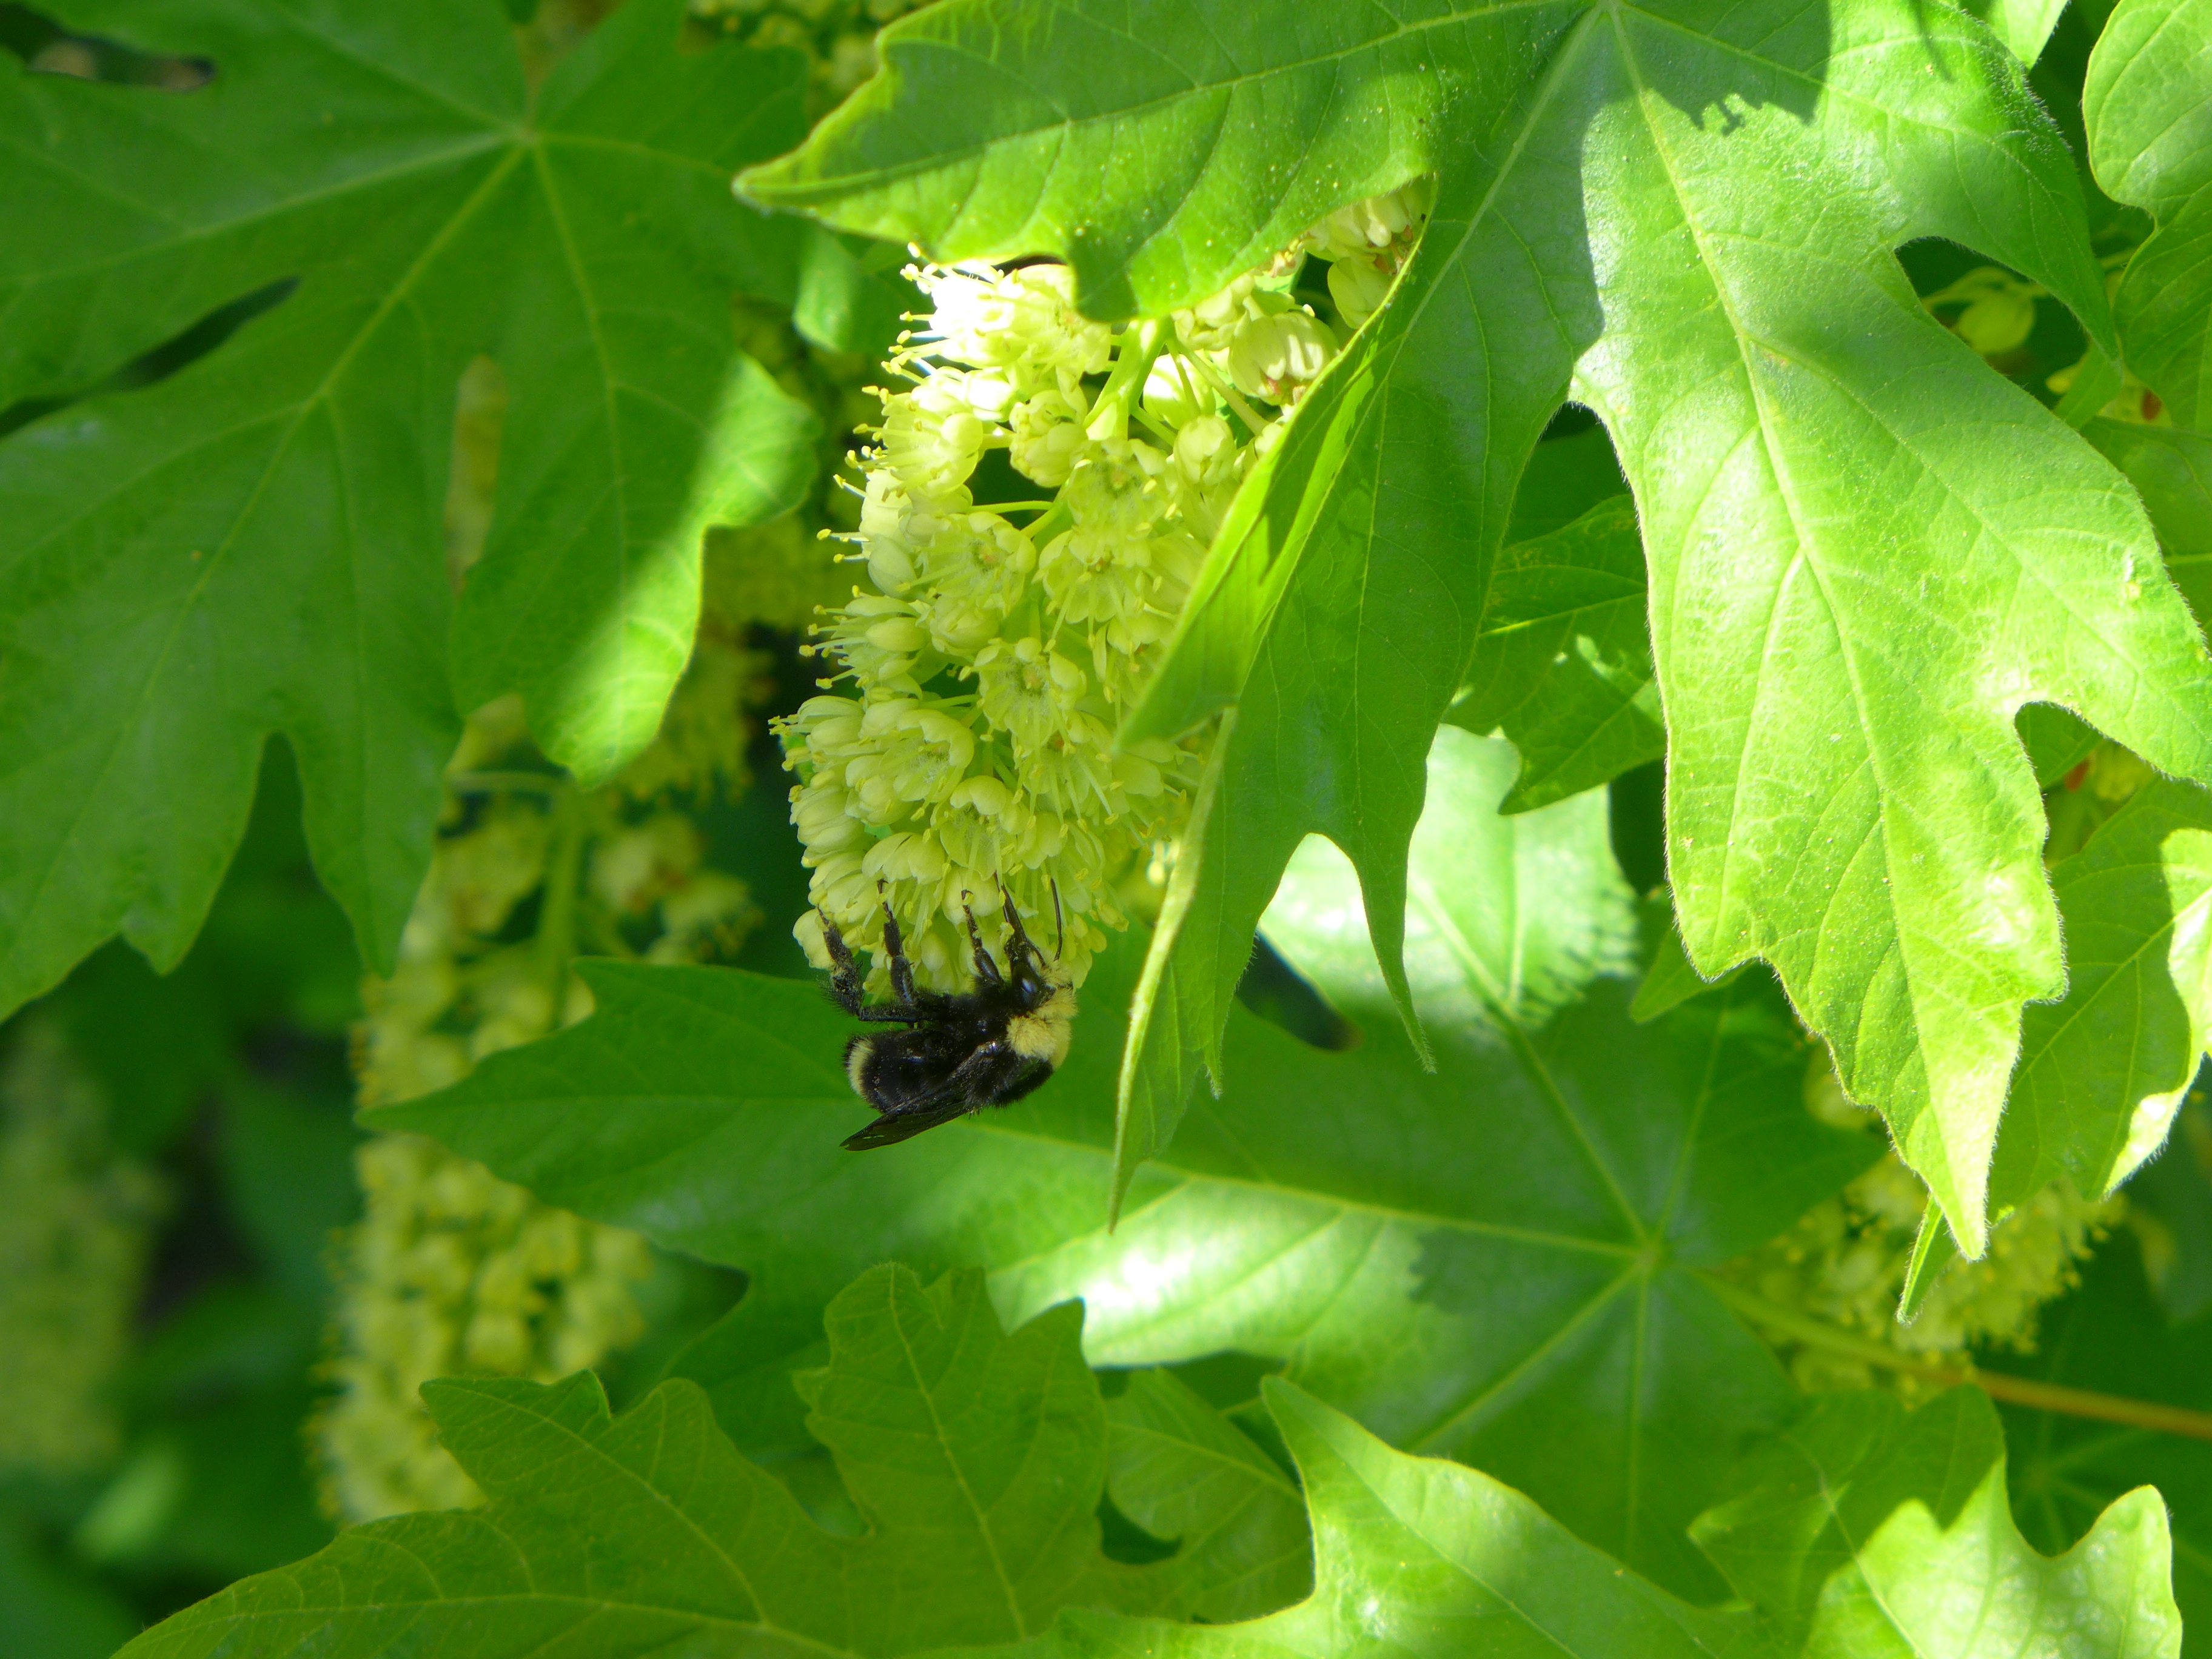 A bumble bee that is predominantly black, but also has a yellow stripe near its tail and a yellow face and shoulders, hangs upside down on a small bloom on a maple tree.